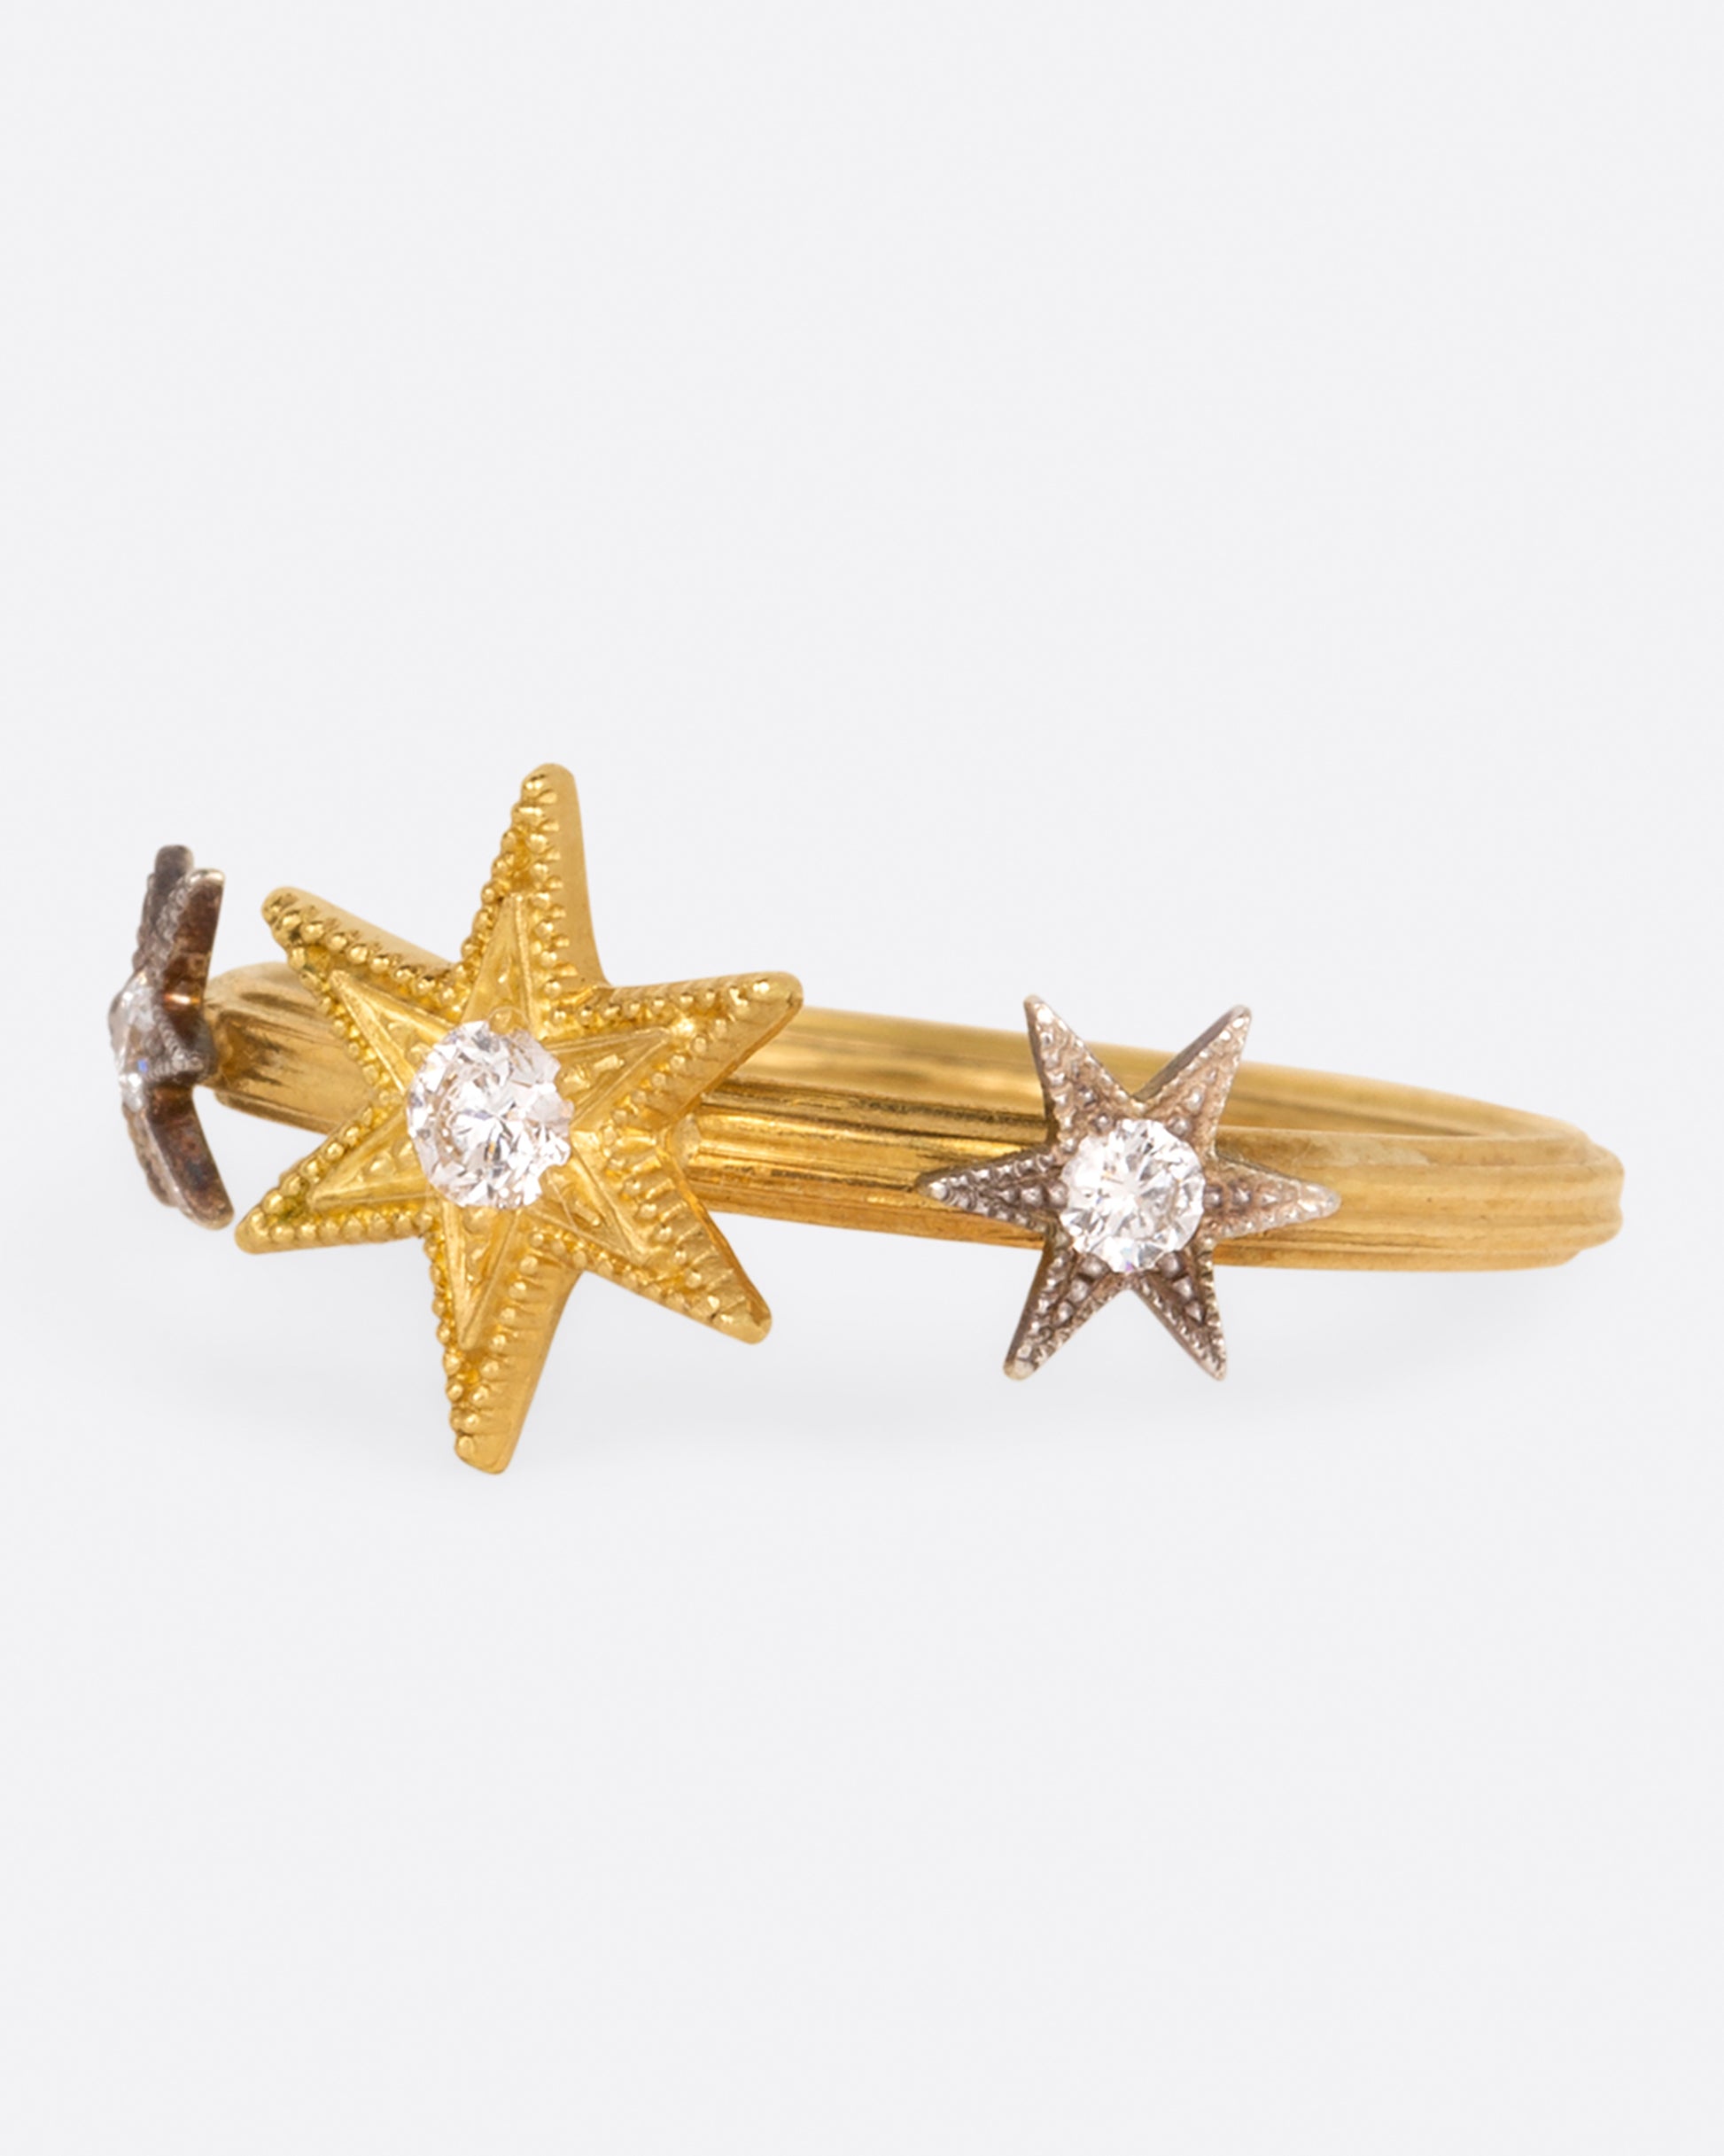 This ring features three millgrain stars; two platinum and one yellow gold, all dotted with diamonds.